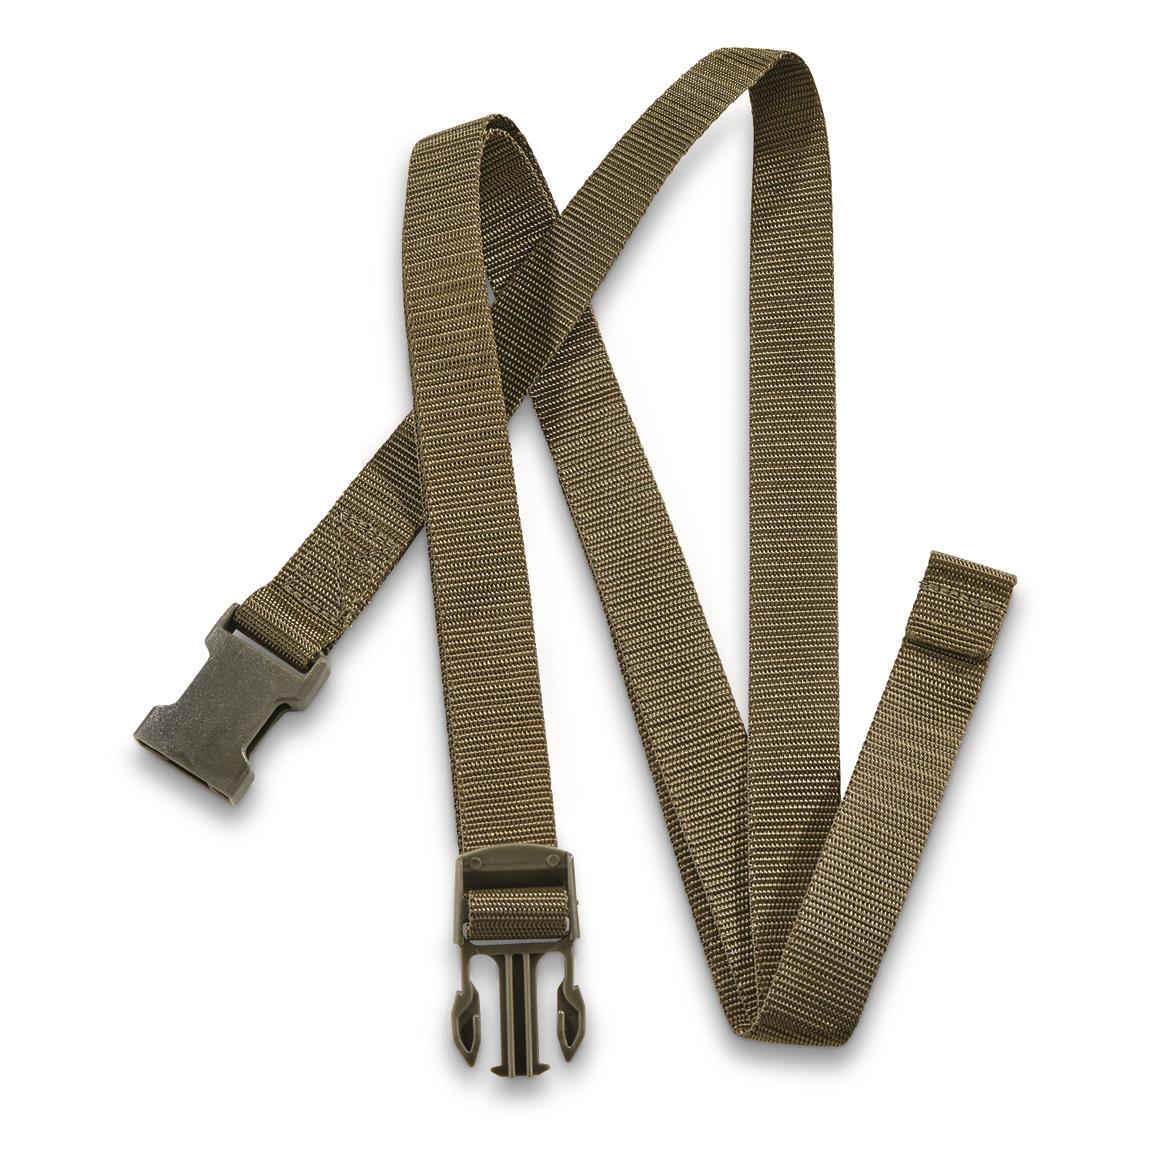 Swiss Military Surplus Straps with Buckles, 8 Pack, Olive Drab, New